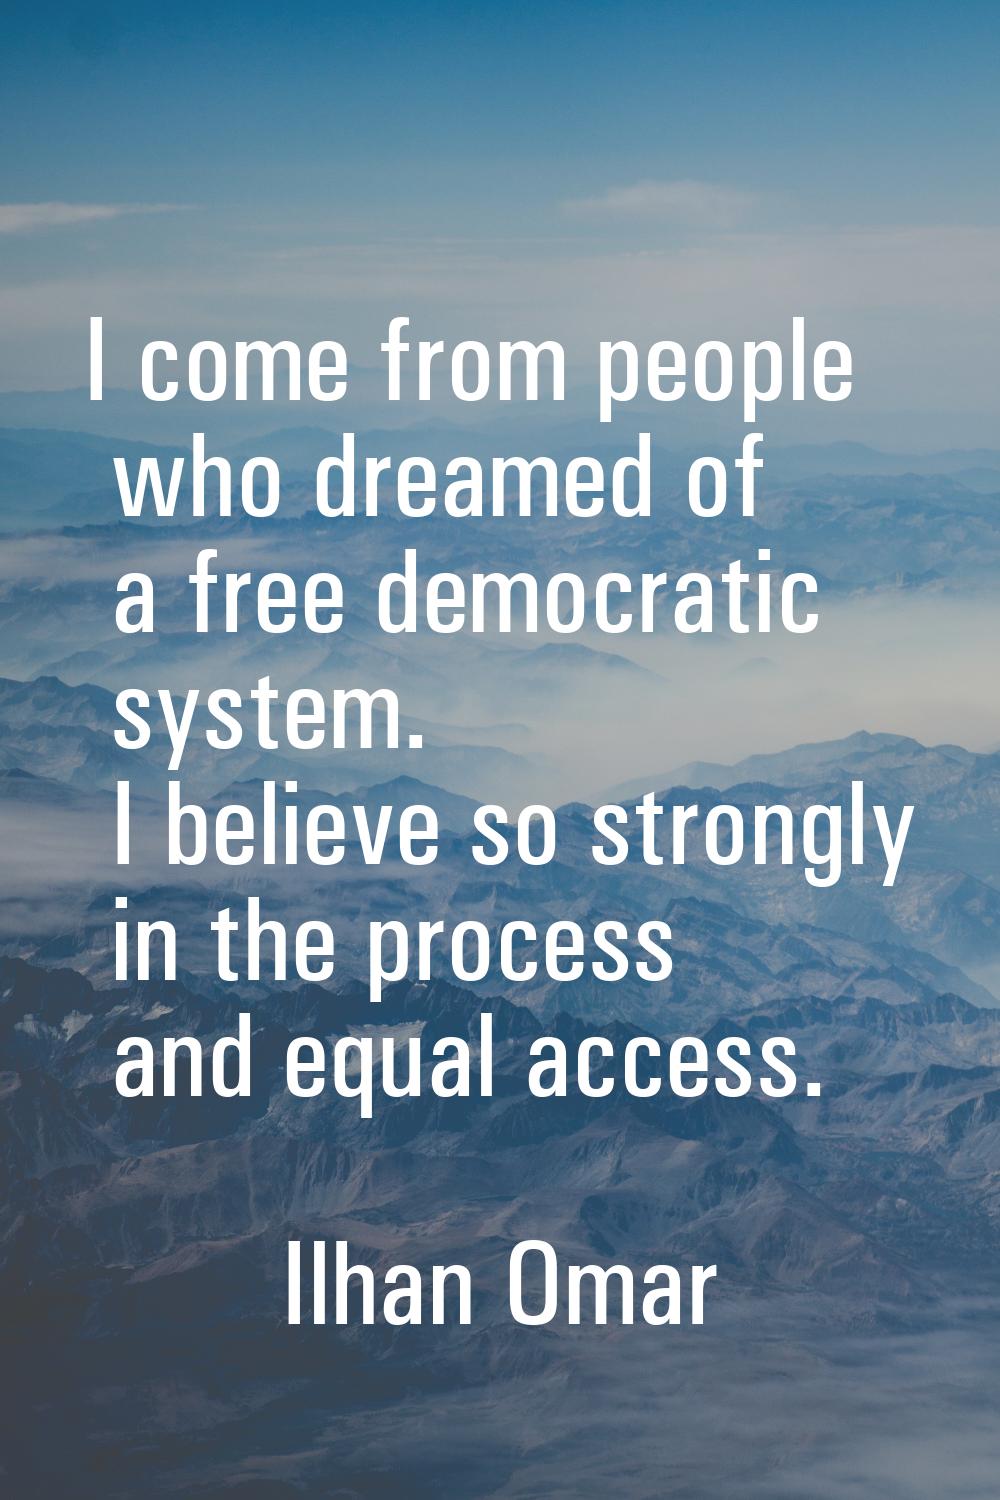 I come from people who dreamed of a free democratic system. I believe so strongly in the process an